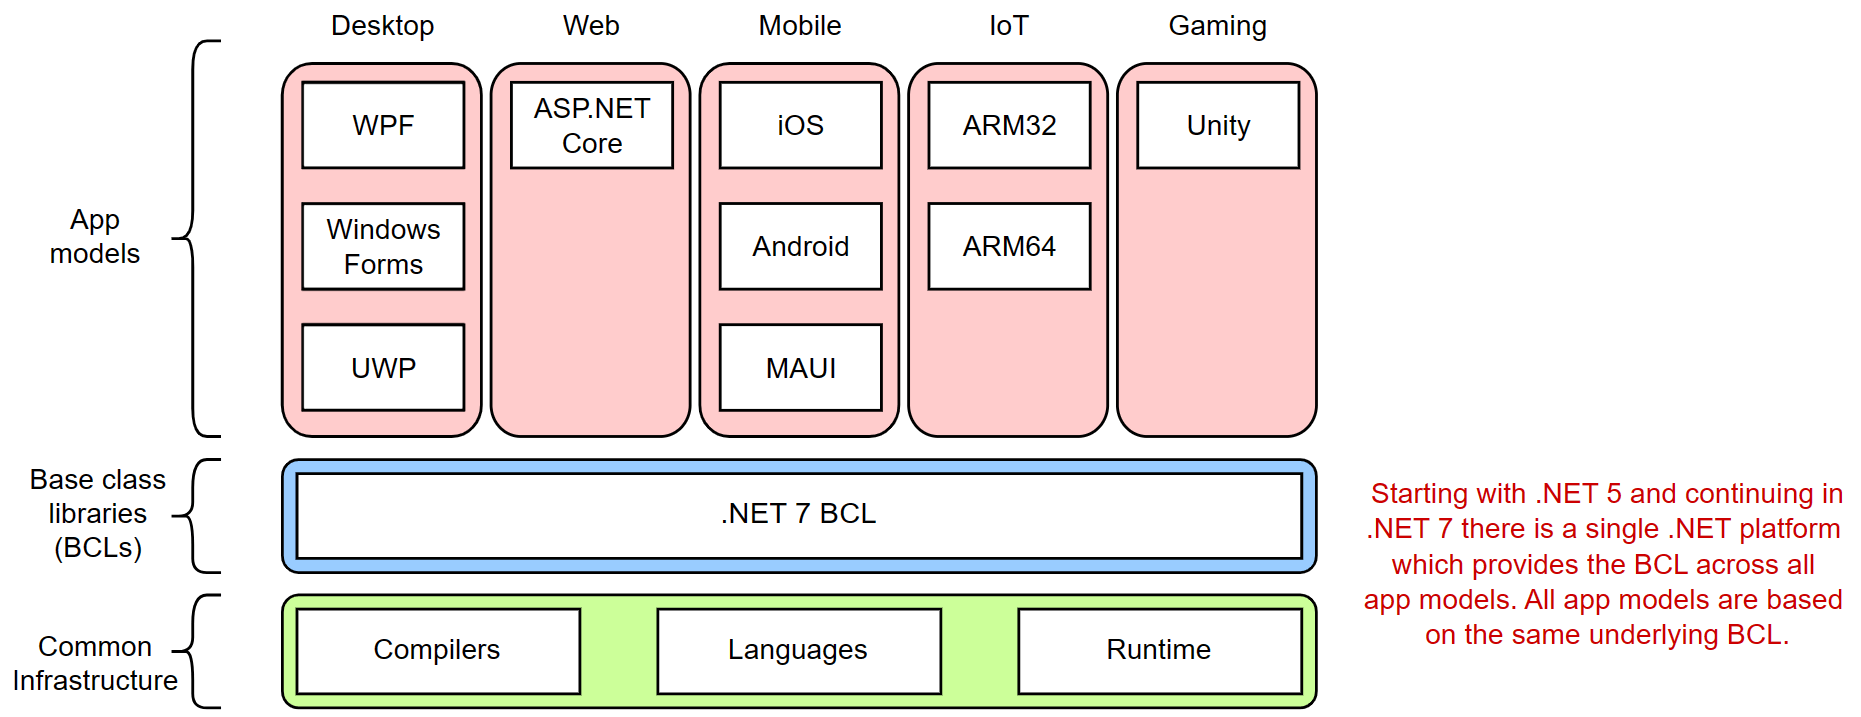 Image showing the One.NET vision to unite the various plataforms.